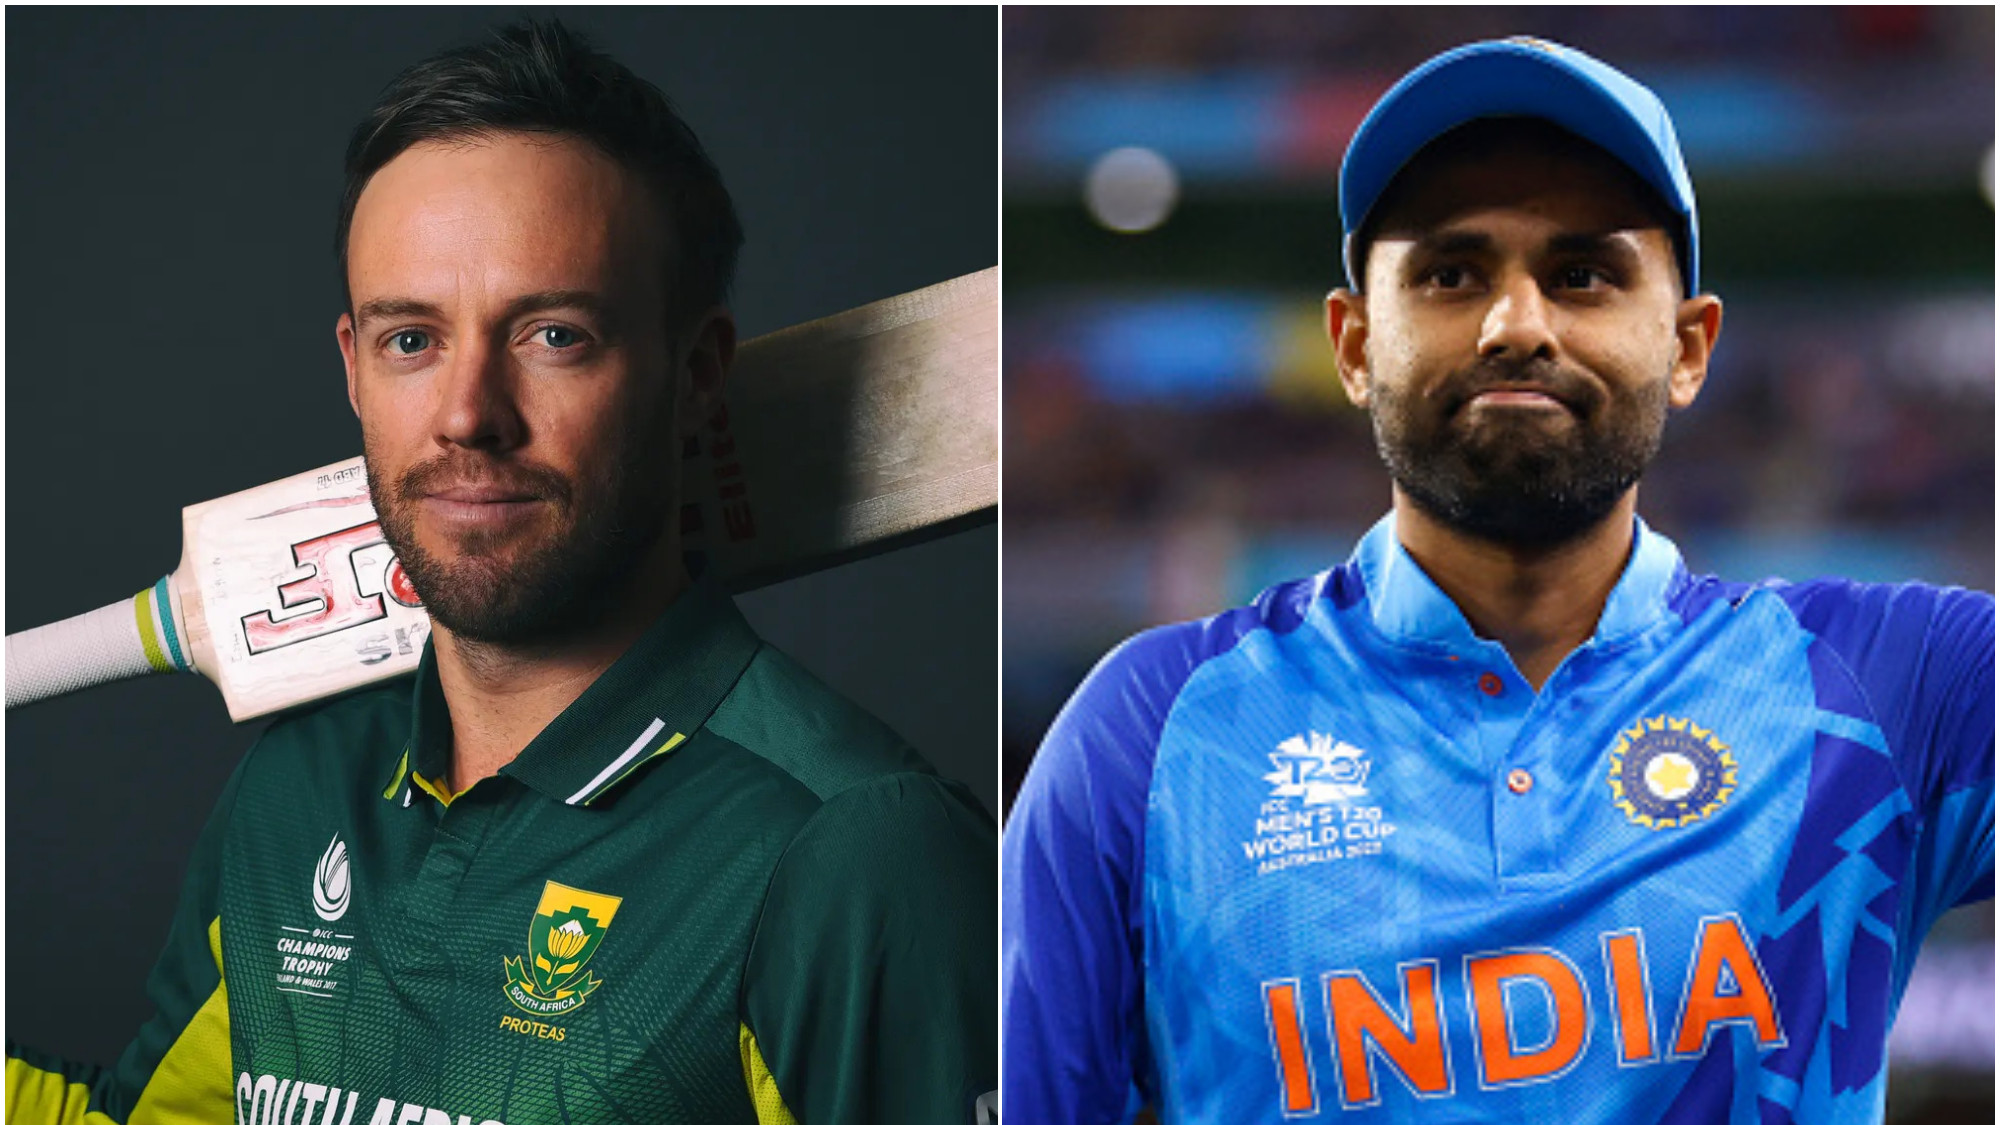 T20 World Cup 2022: “I never saw this happening, the way he is playing” - AB de Villiers on Suryakumar Yadav